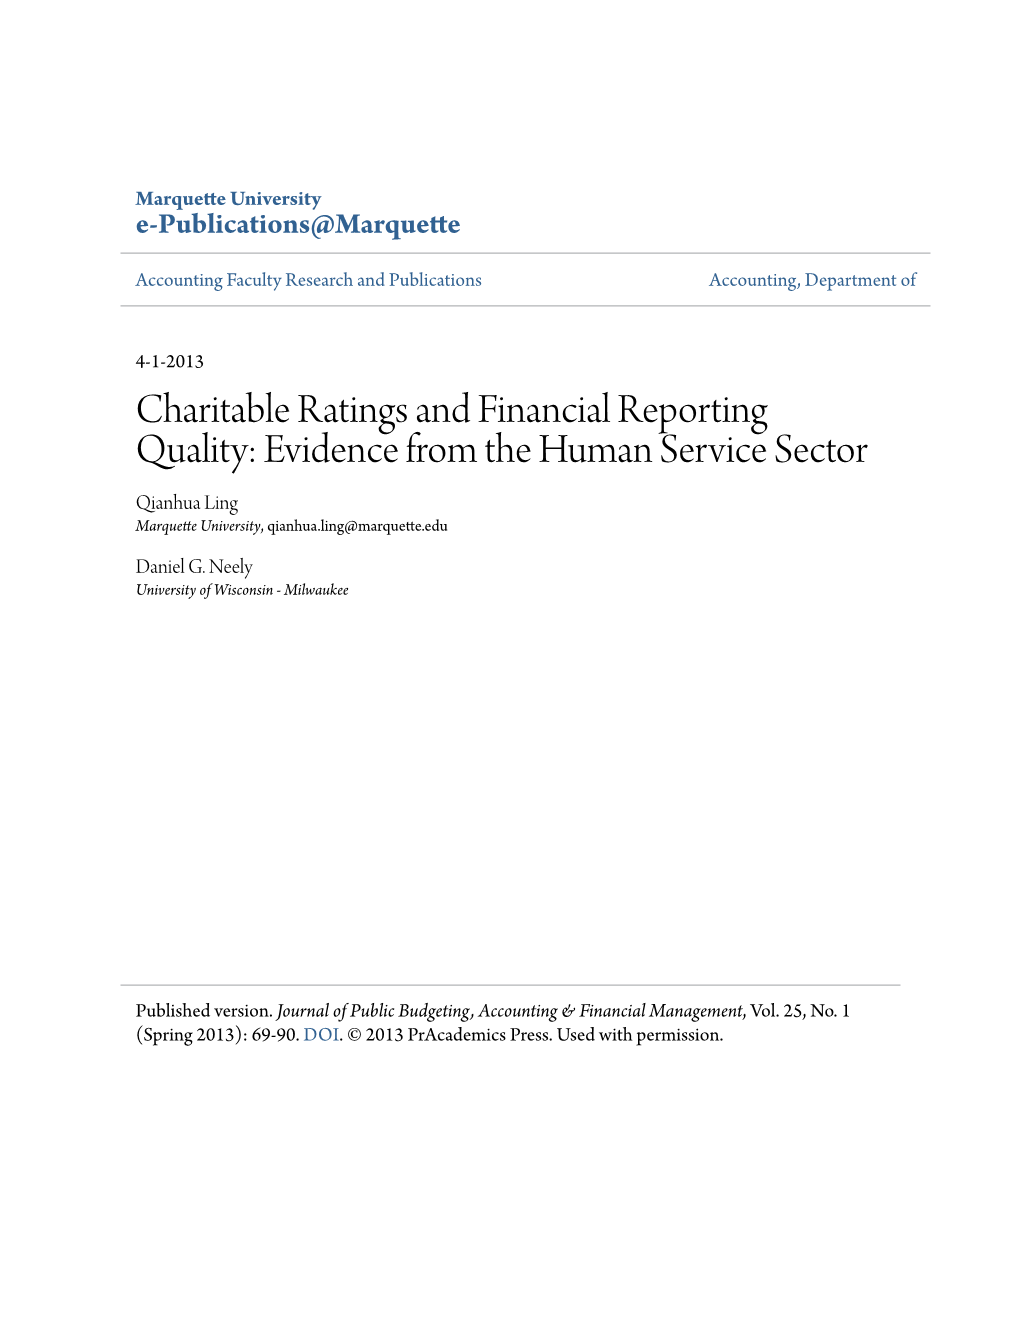 Charitable Ratings and Financial Reporting Quality: Evidence from the Human Service Sector Qianhua Ling Marquette University, Qianhua.Ling@Marquette.Edu